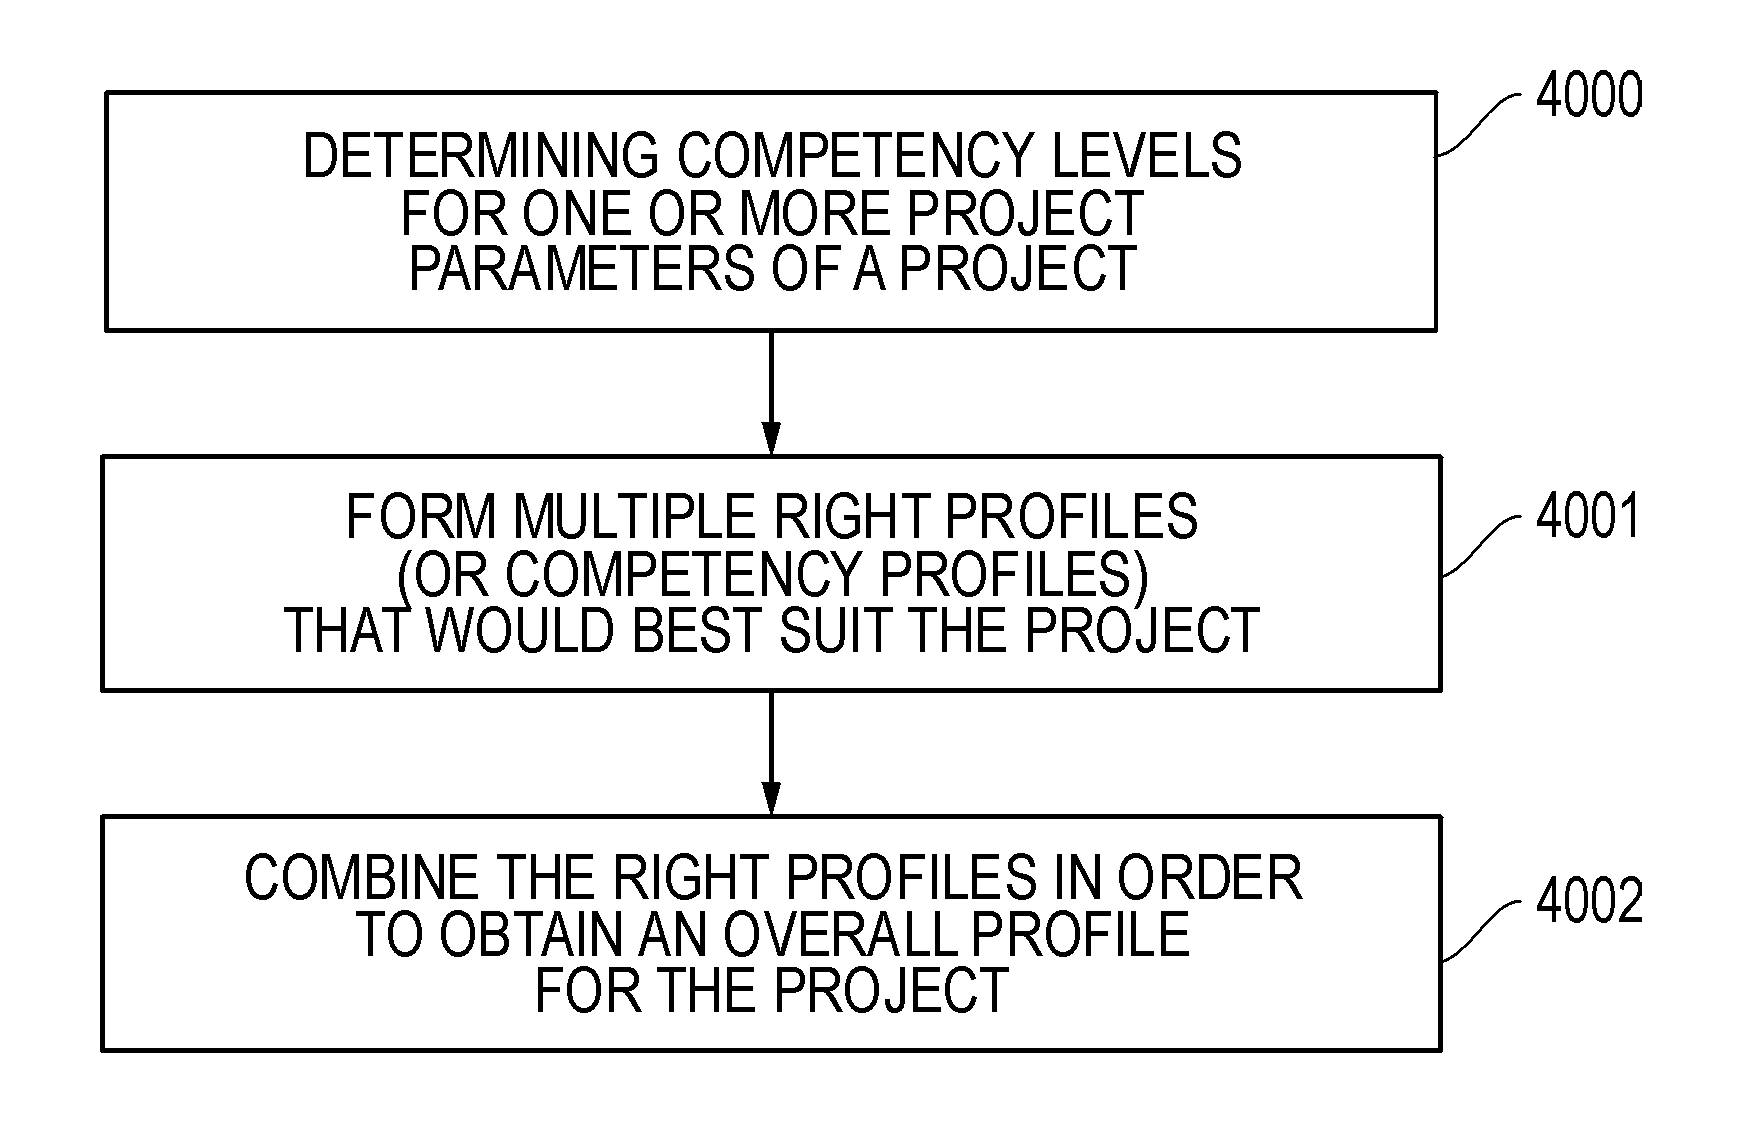 System and method for performing oilfield operations